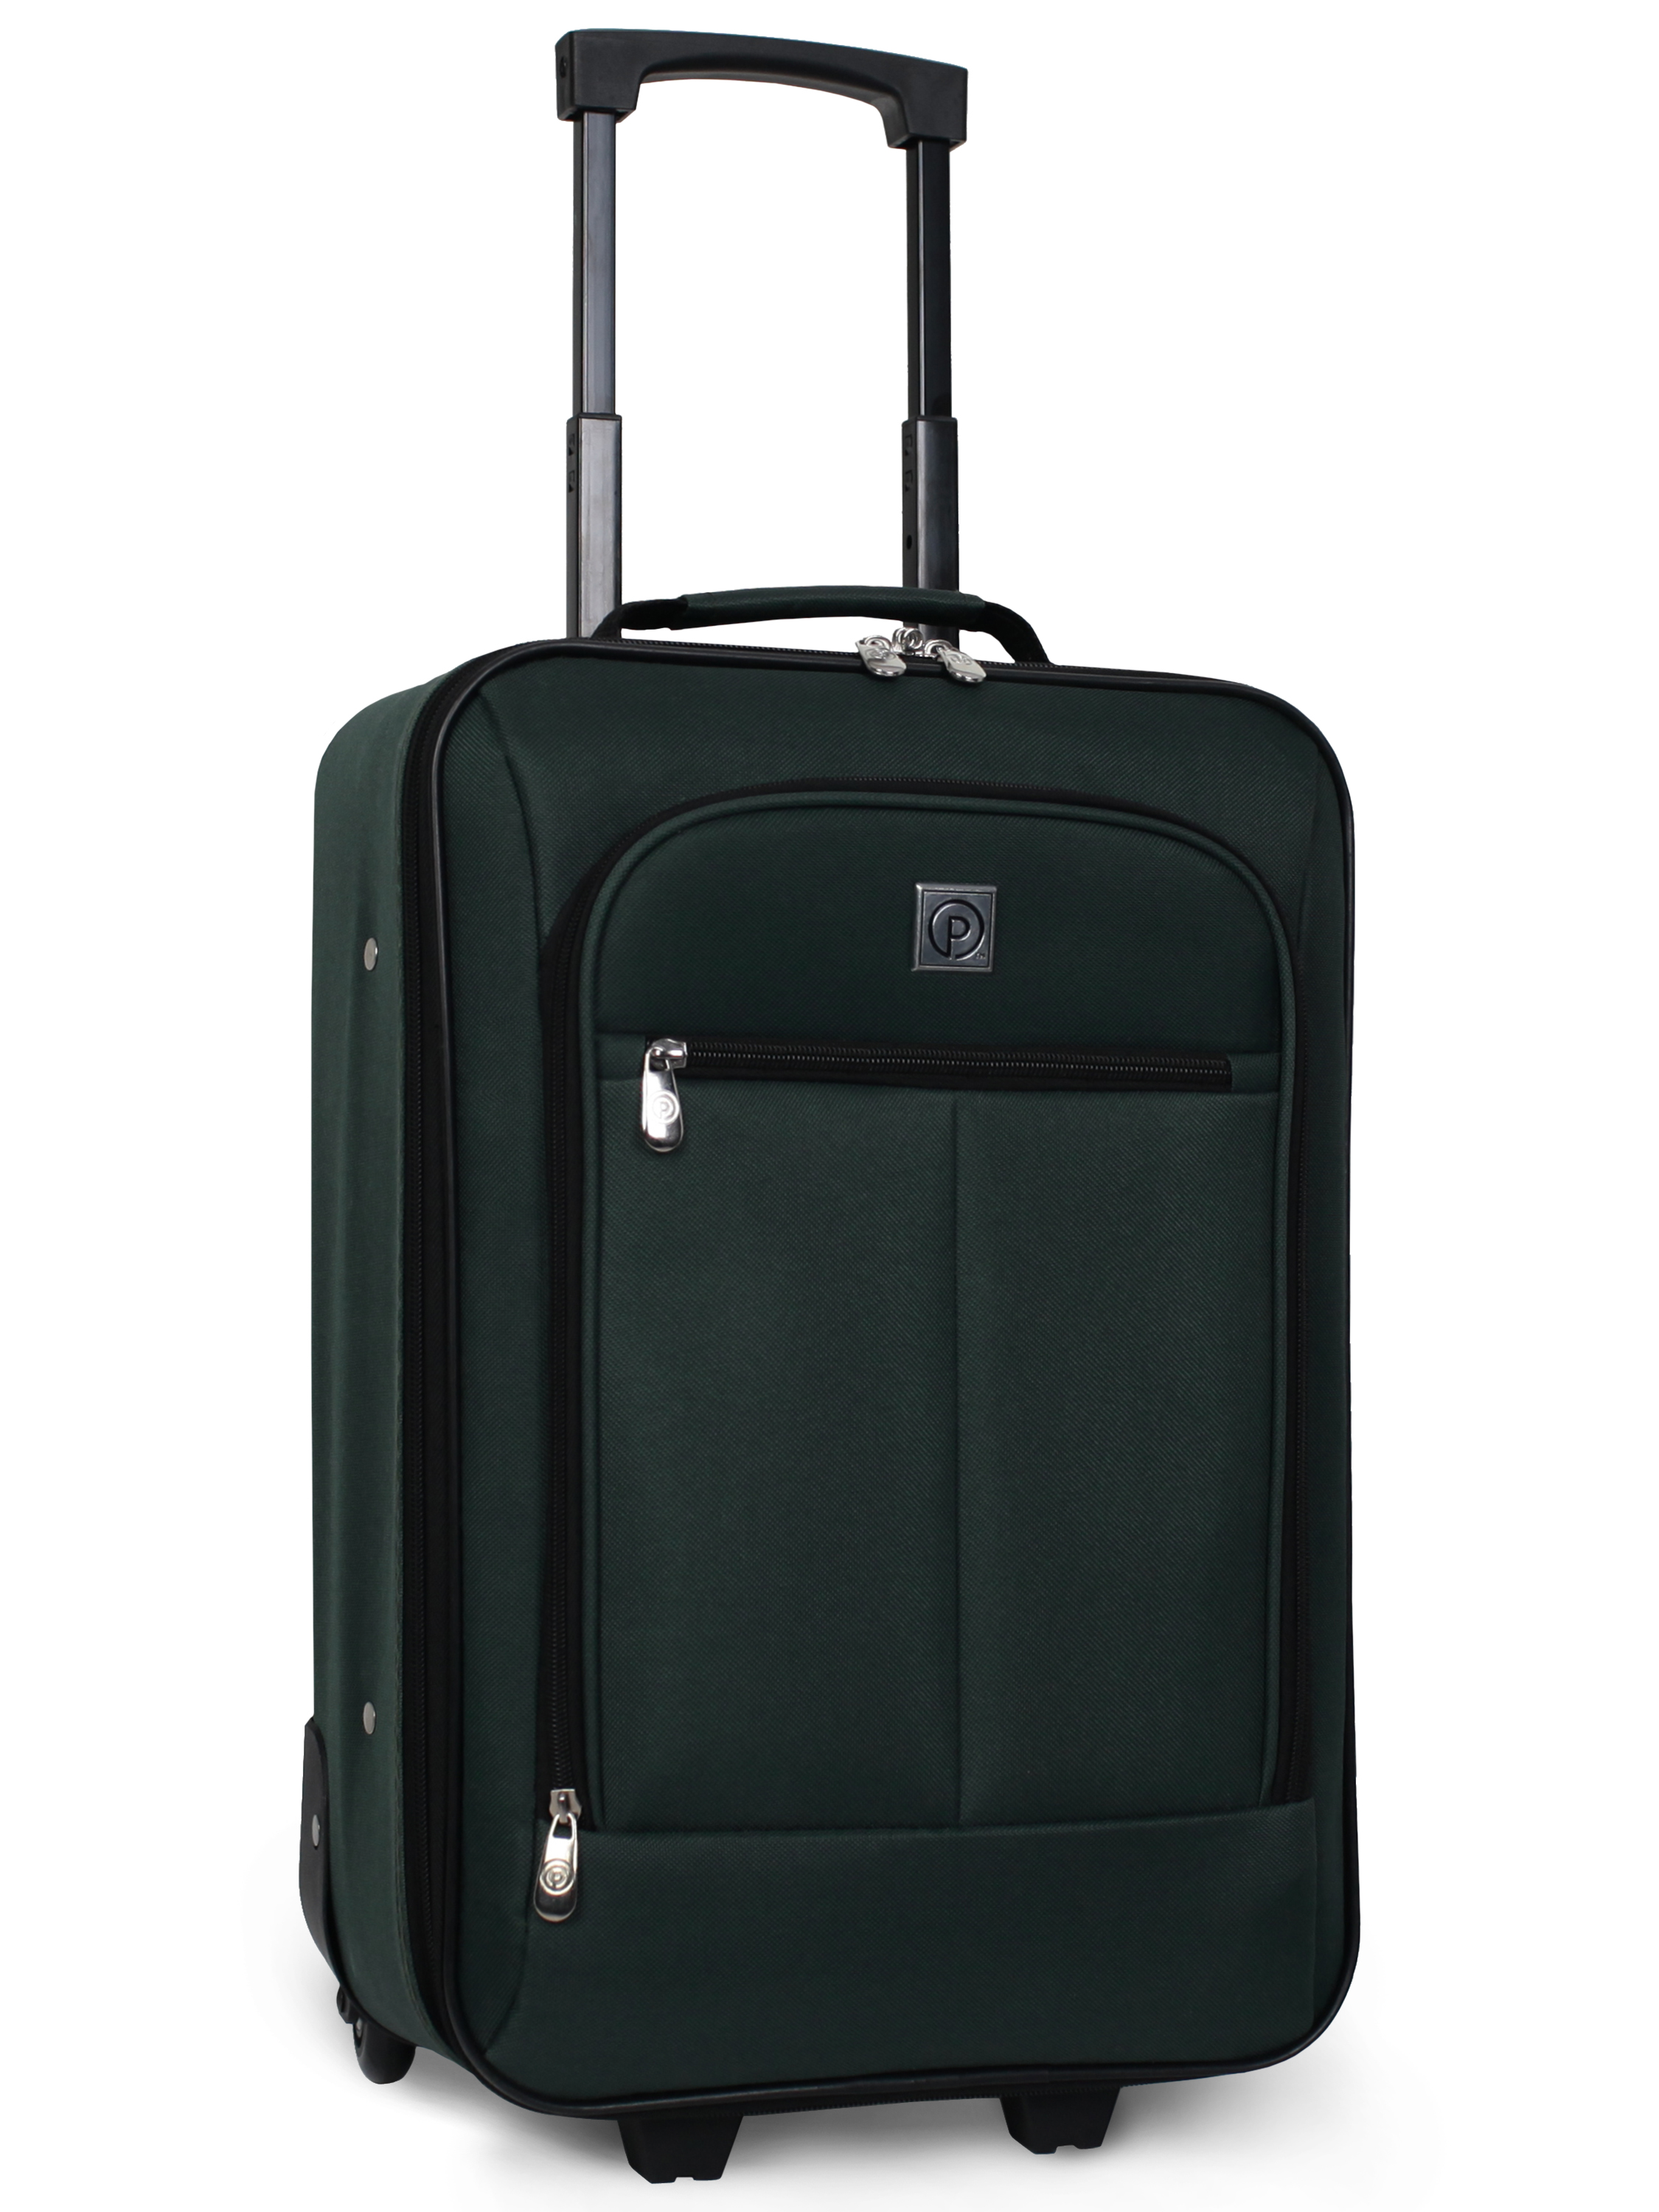 Protege Pilot Case 18" Softside Carry-on Luggage, Green - image 4 of 7